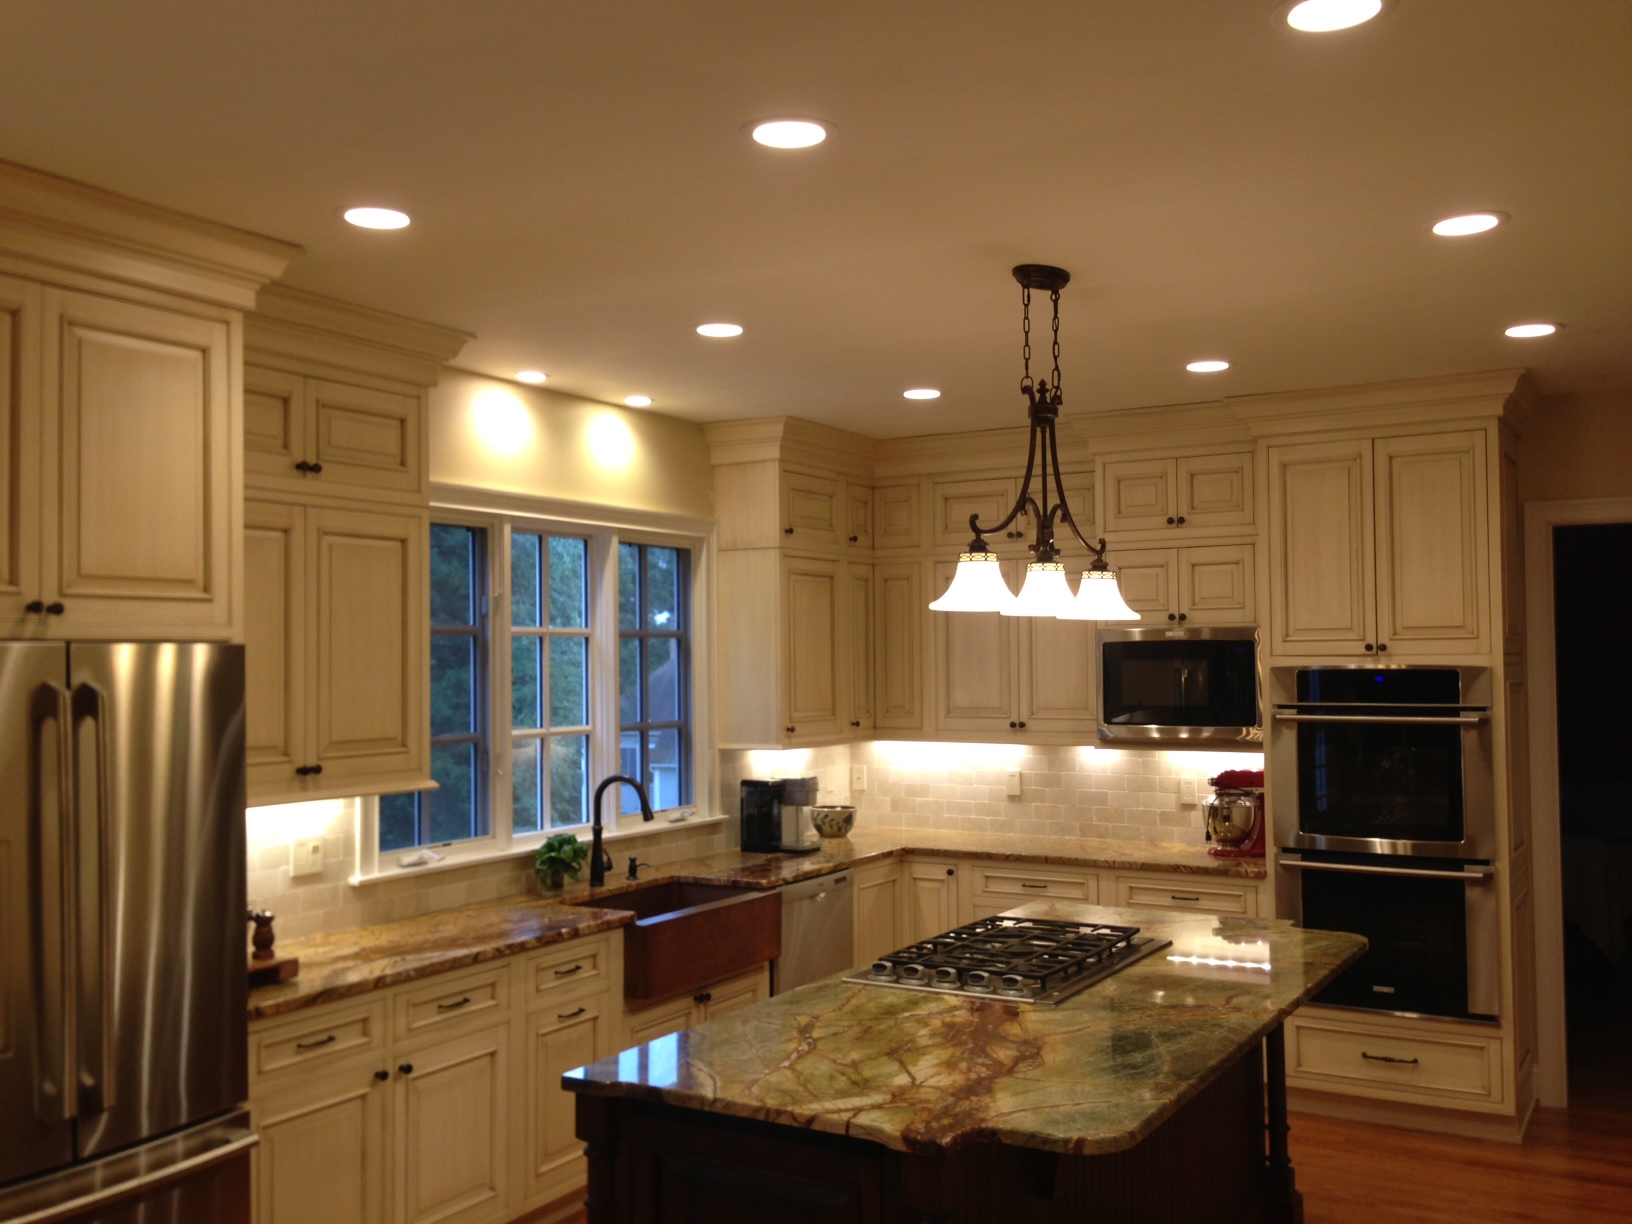 Pot Lighting In Kitchen - BClight